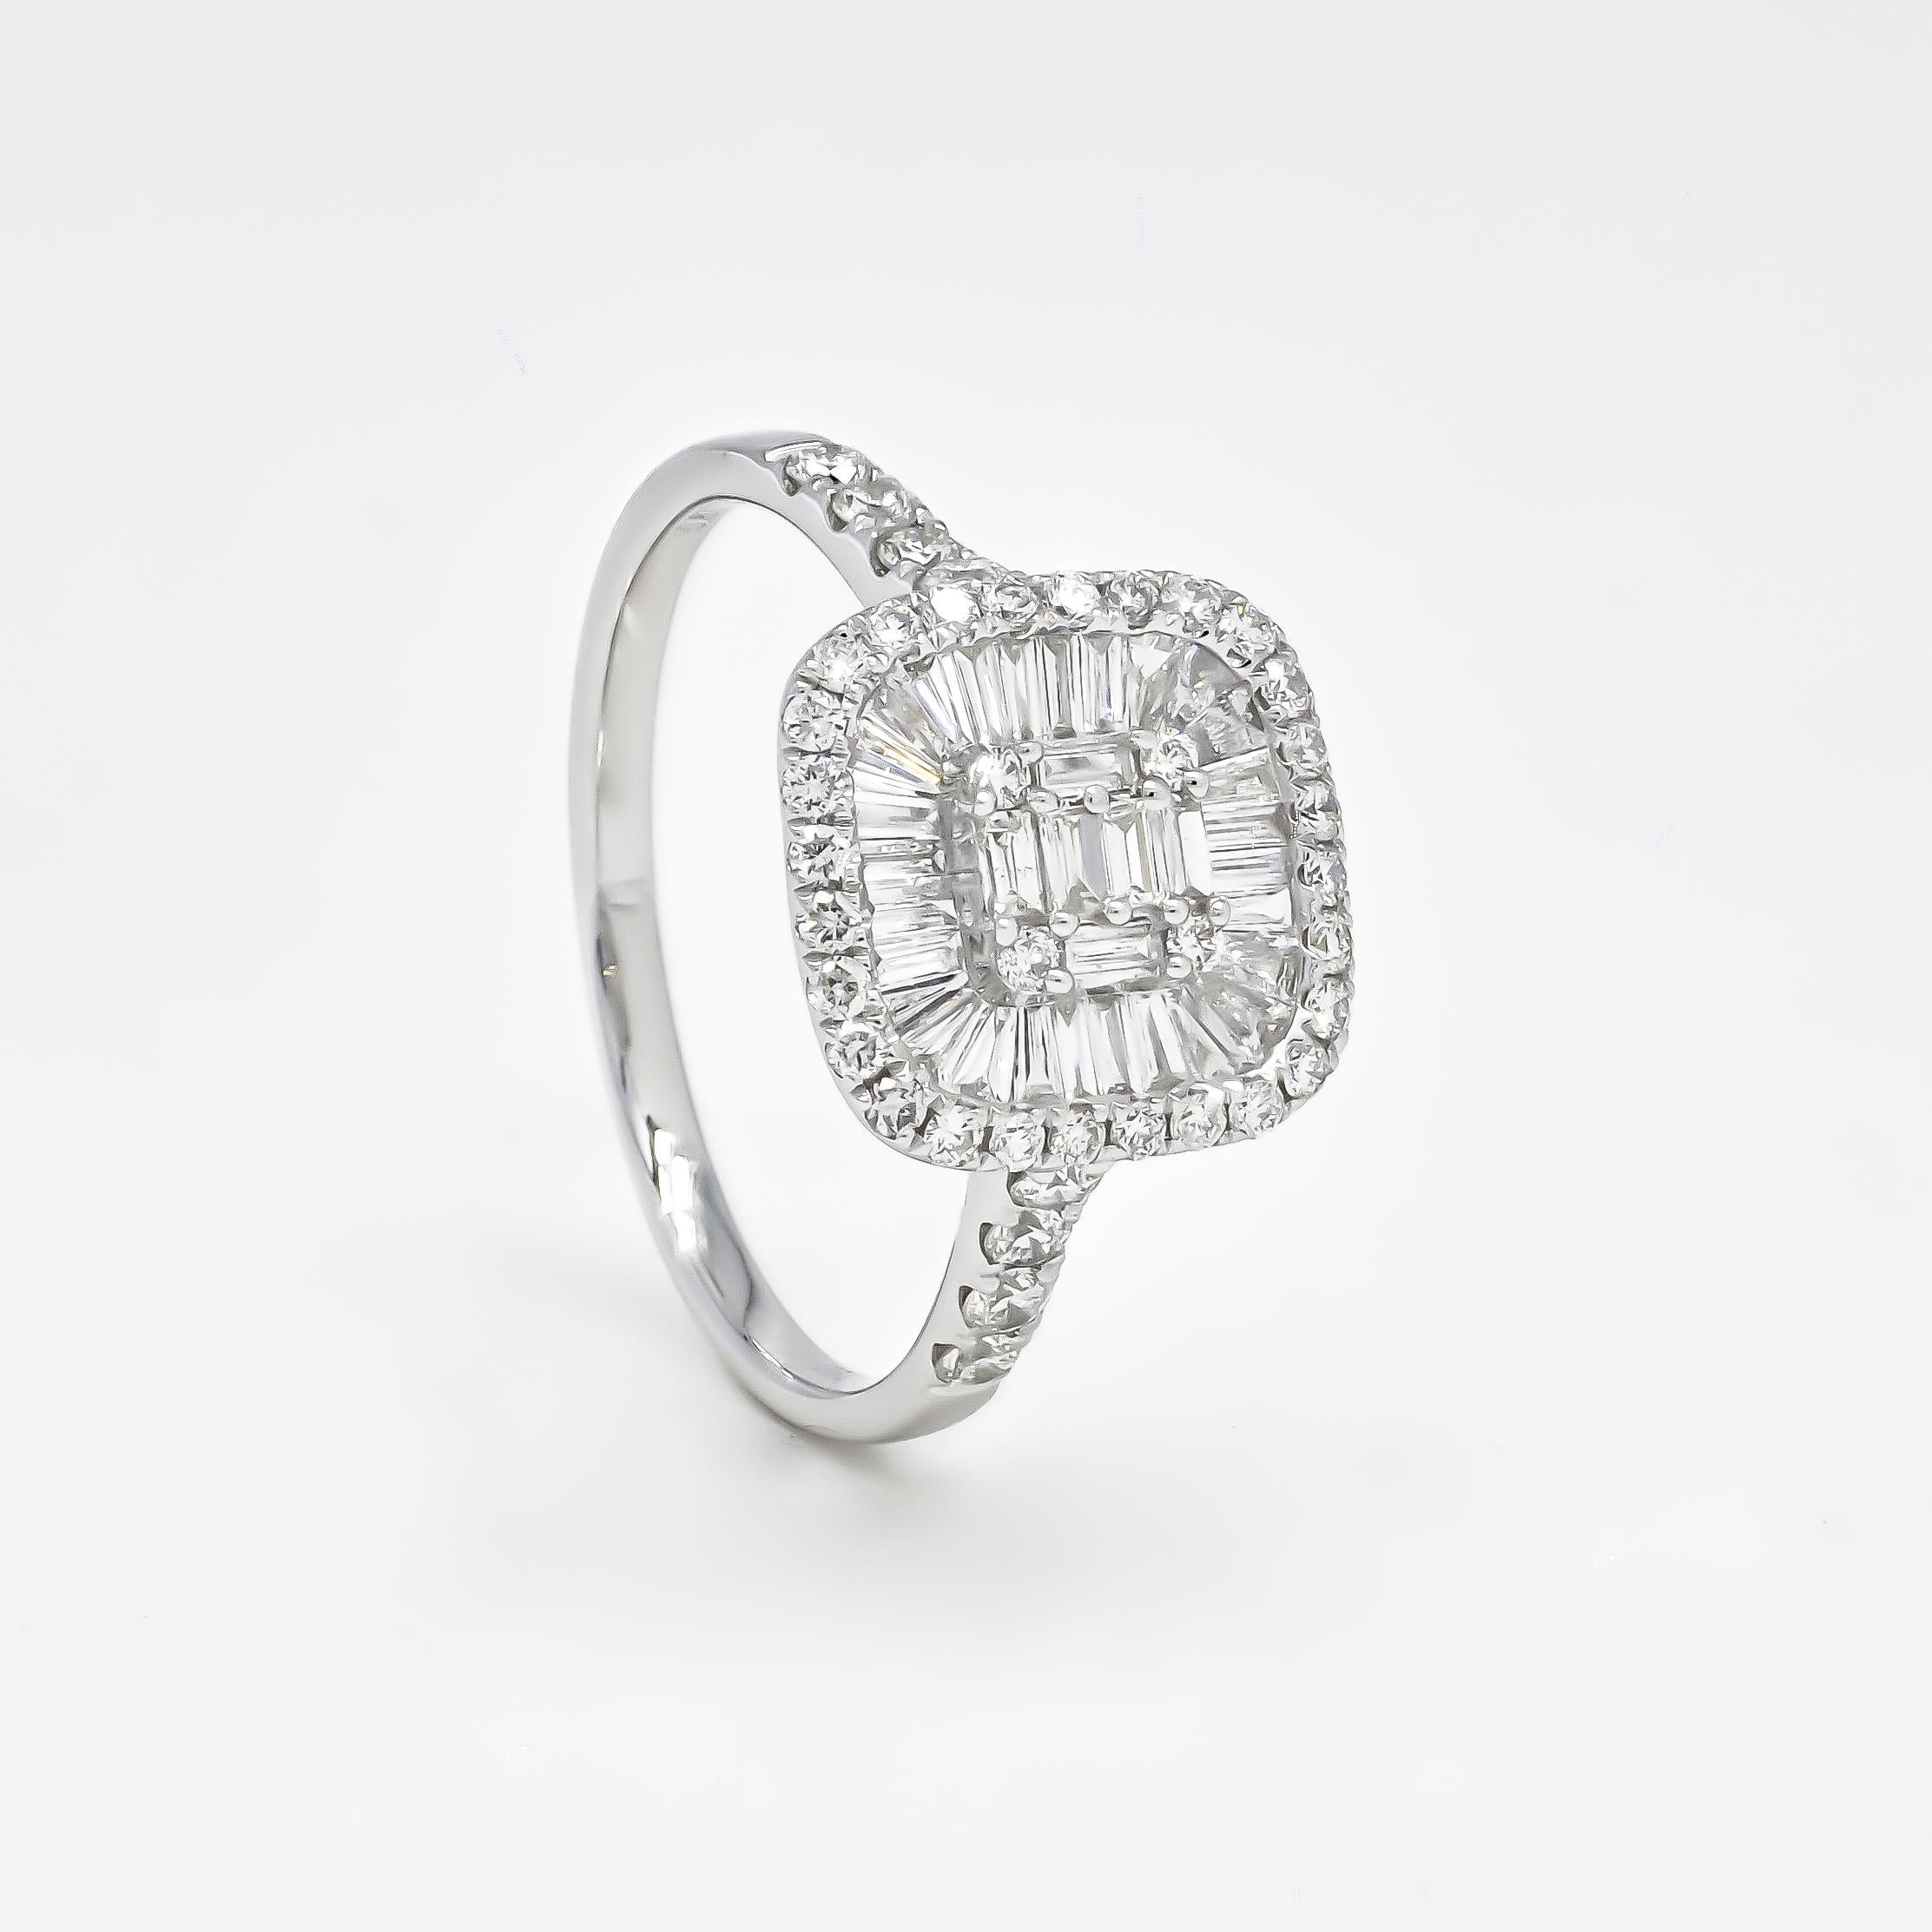 The 18KT White Gold Bridal Modern Ring is a petite and unique diamond ring, perfect for the modern bride who loves to make a statement with her jewelry. The starburst design, featuring baguette diamonds, adds extra sparkle and glamour to the piece.